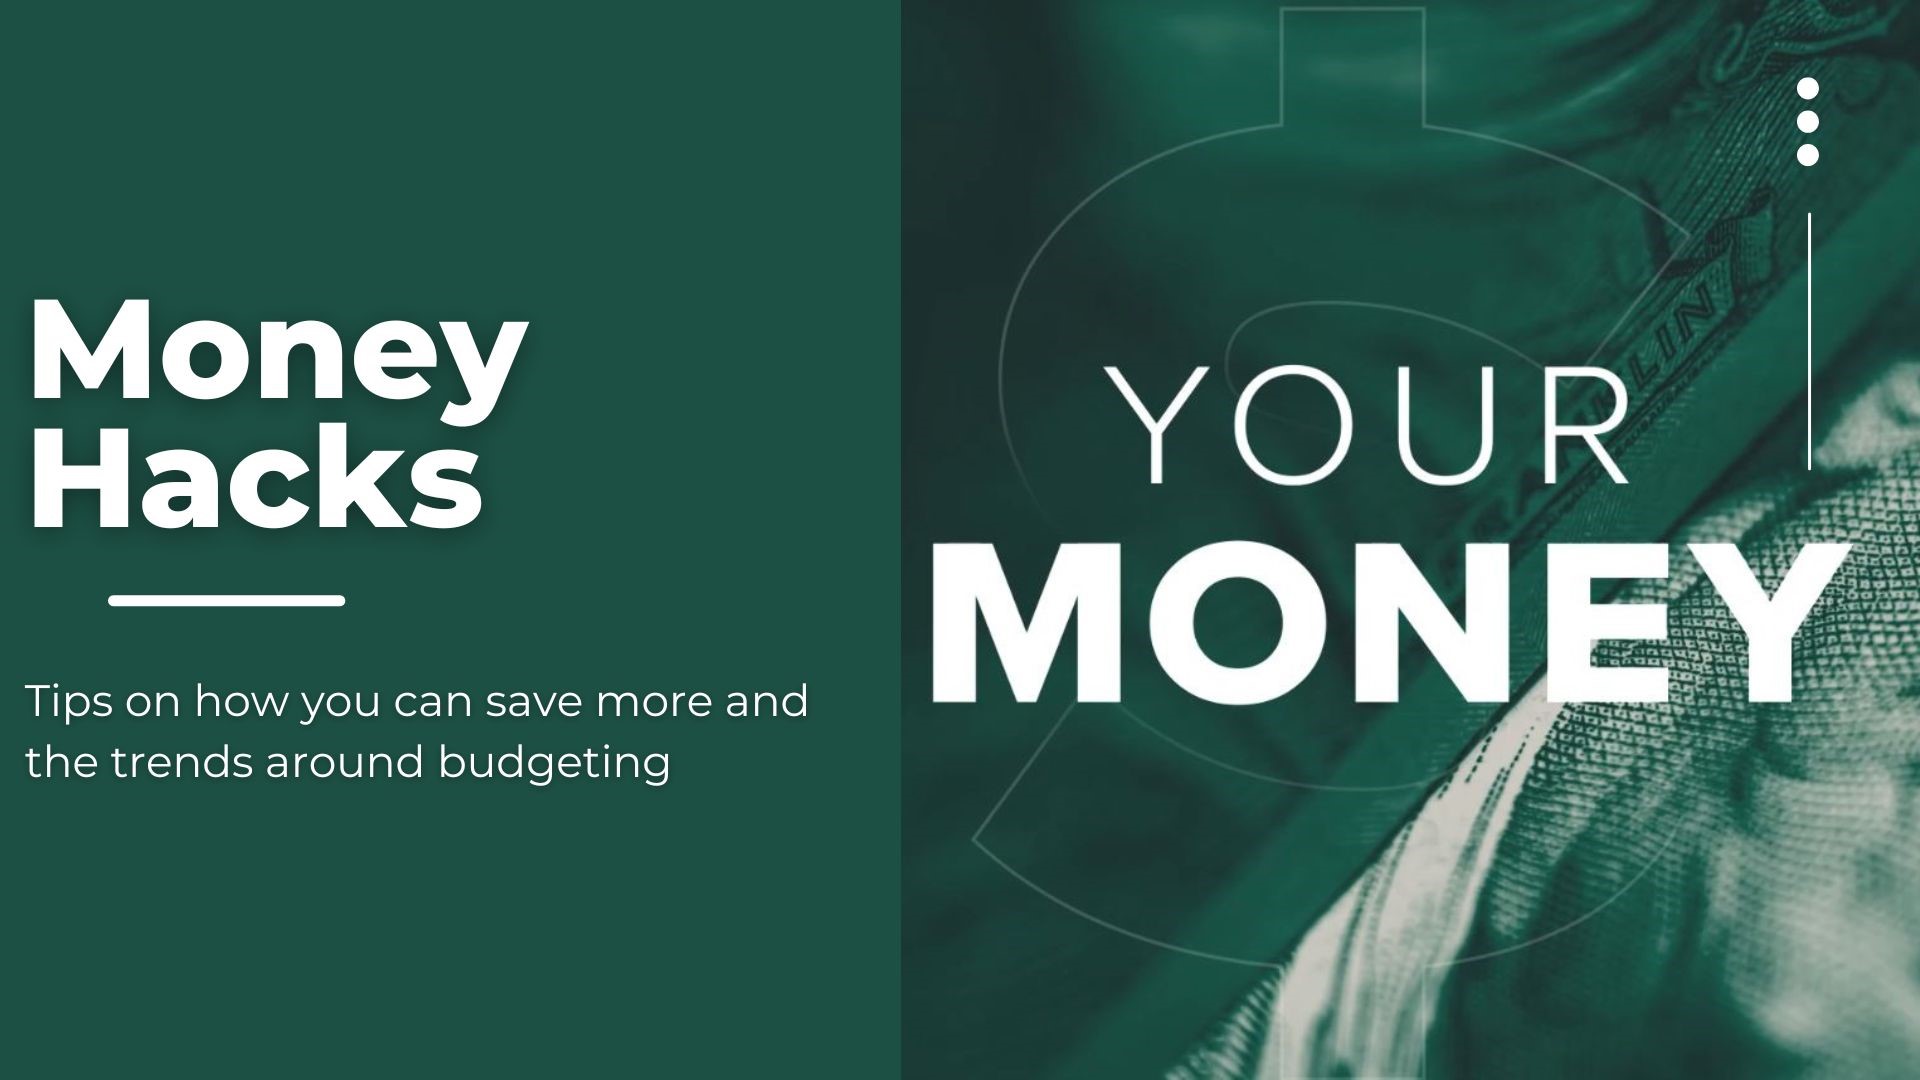 Tips to help you save more money, including hacks, budgeting advice and the TikTok trends worth trying.